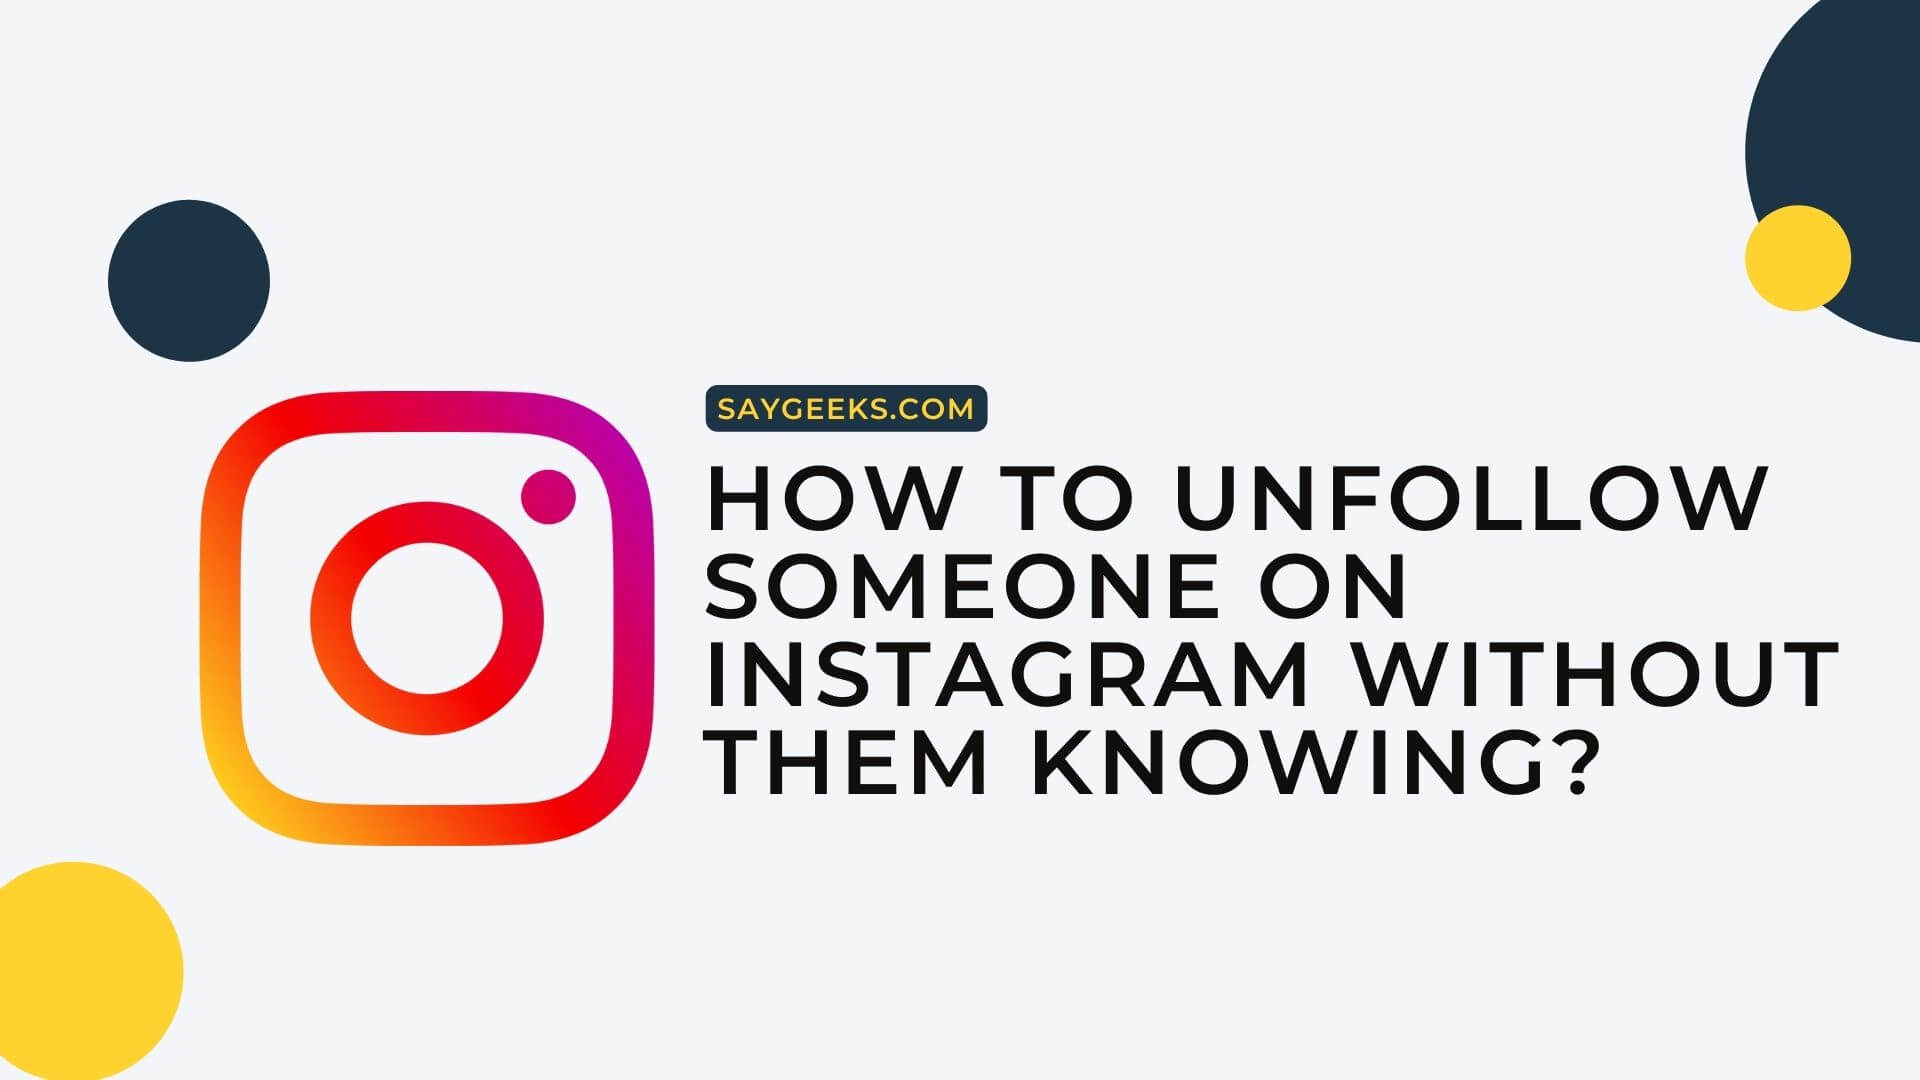 How to unfollow someone on Instagram without them knowing